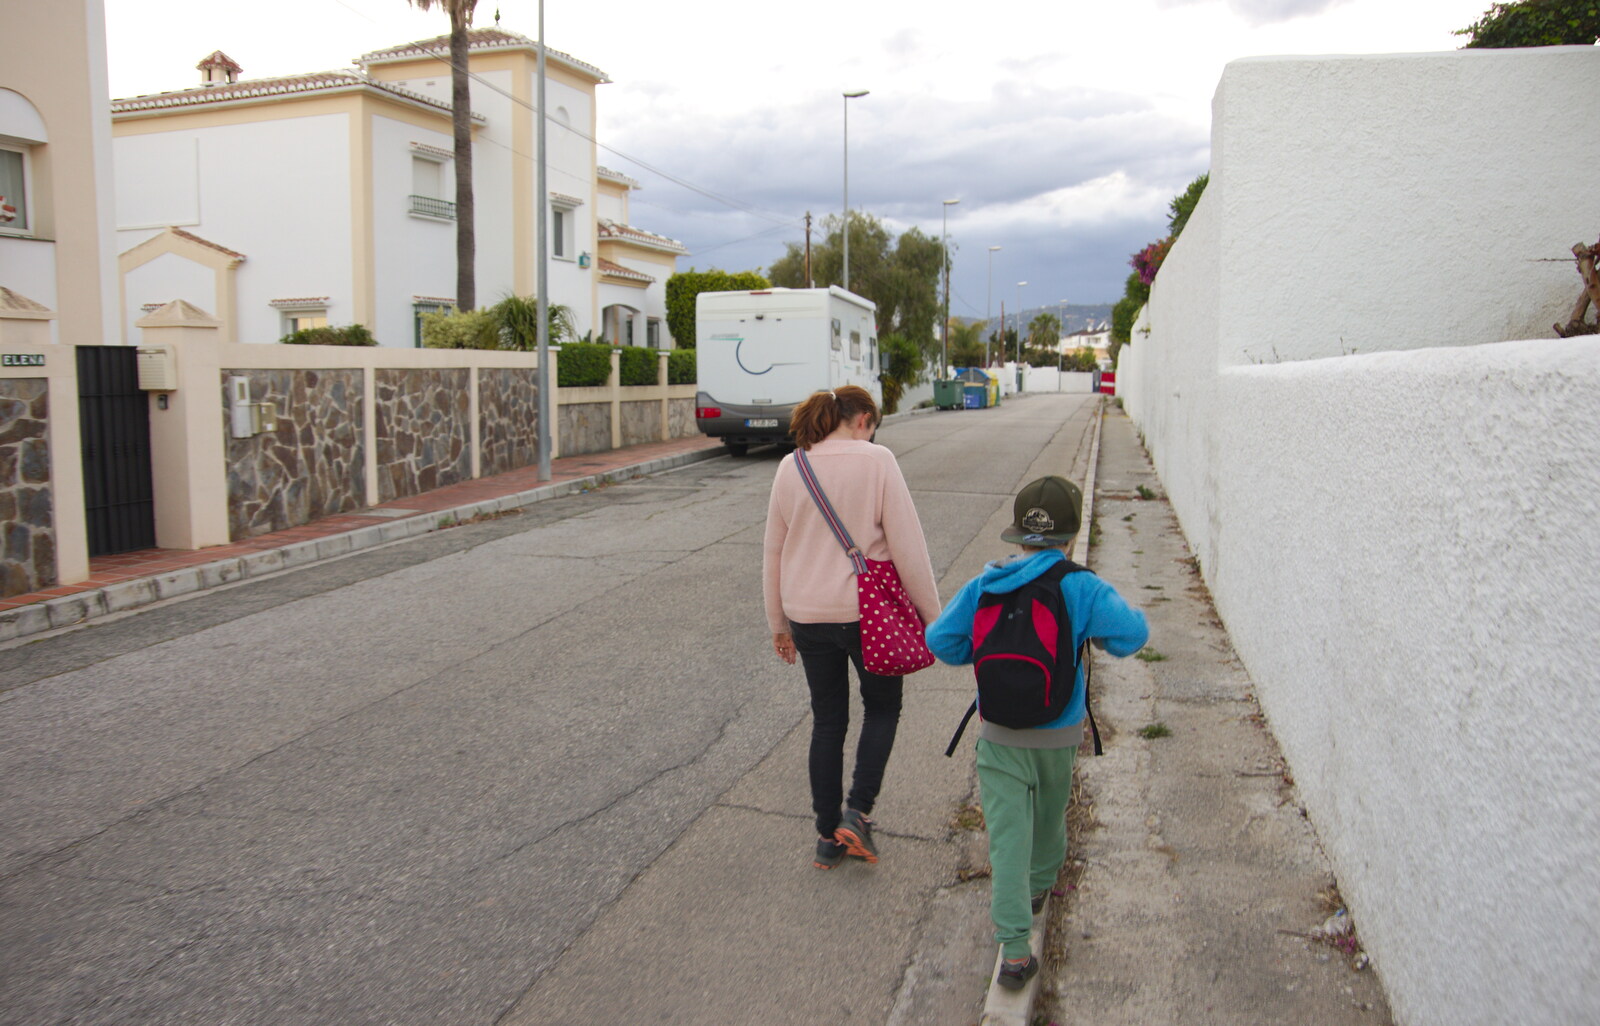 On the long walk back to the Capuchinos from The Caves of Nerja, and Frigiliana, Andalusia, Spain - 18th April 2019